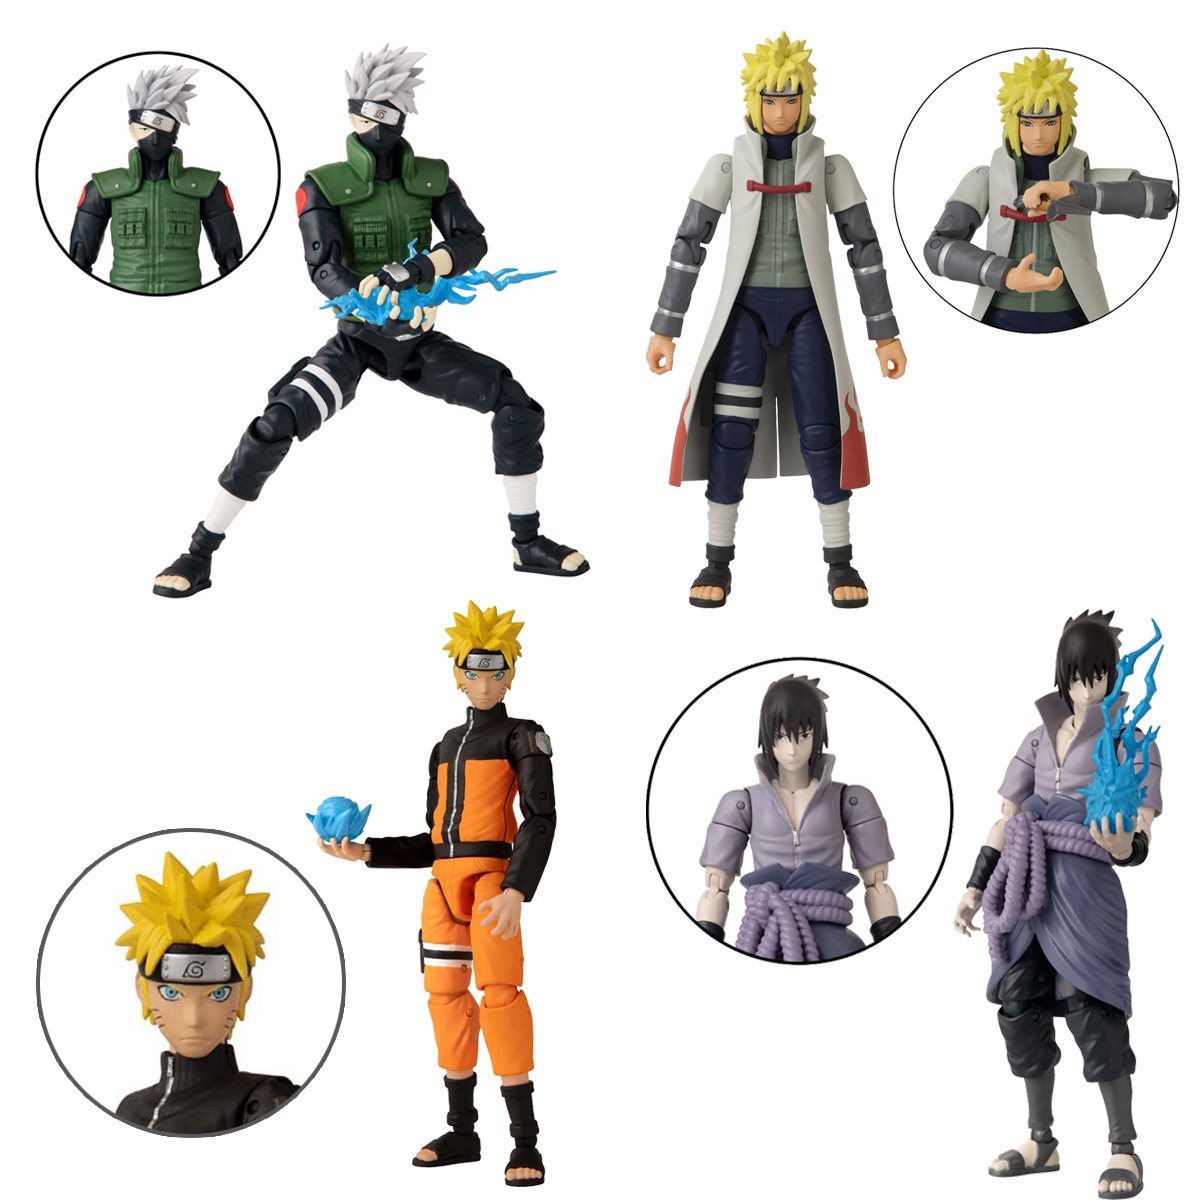 Bandai America Expands Anime Heroes Line with New Figures